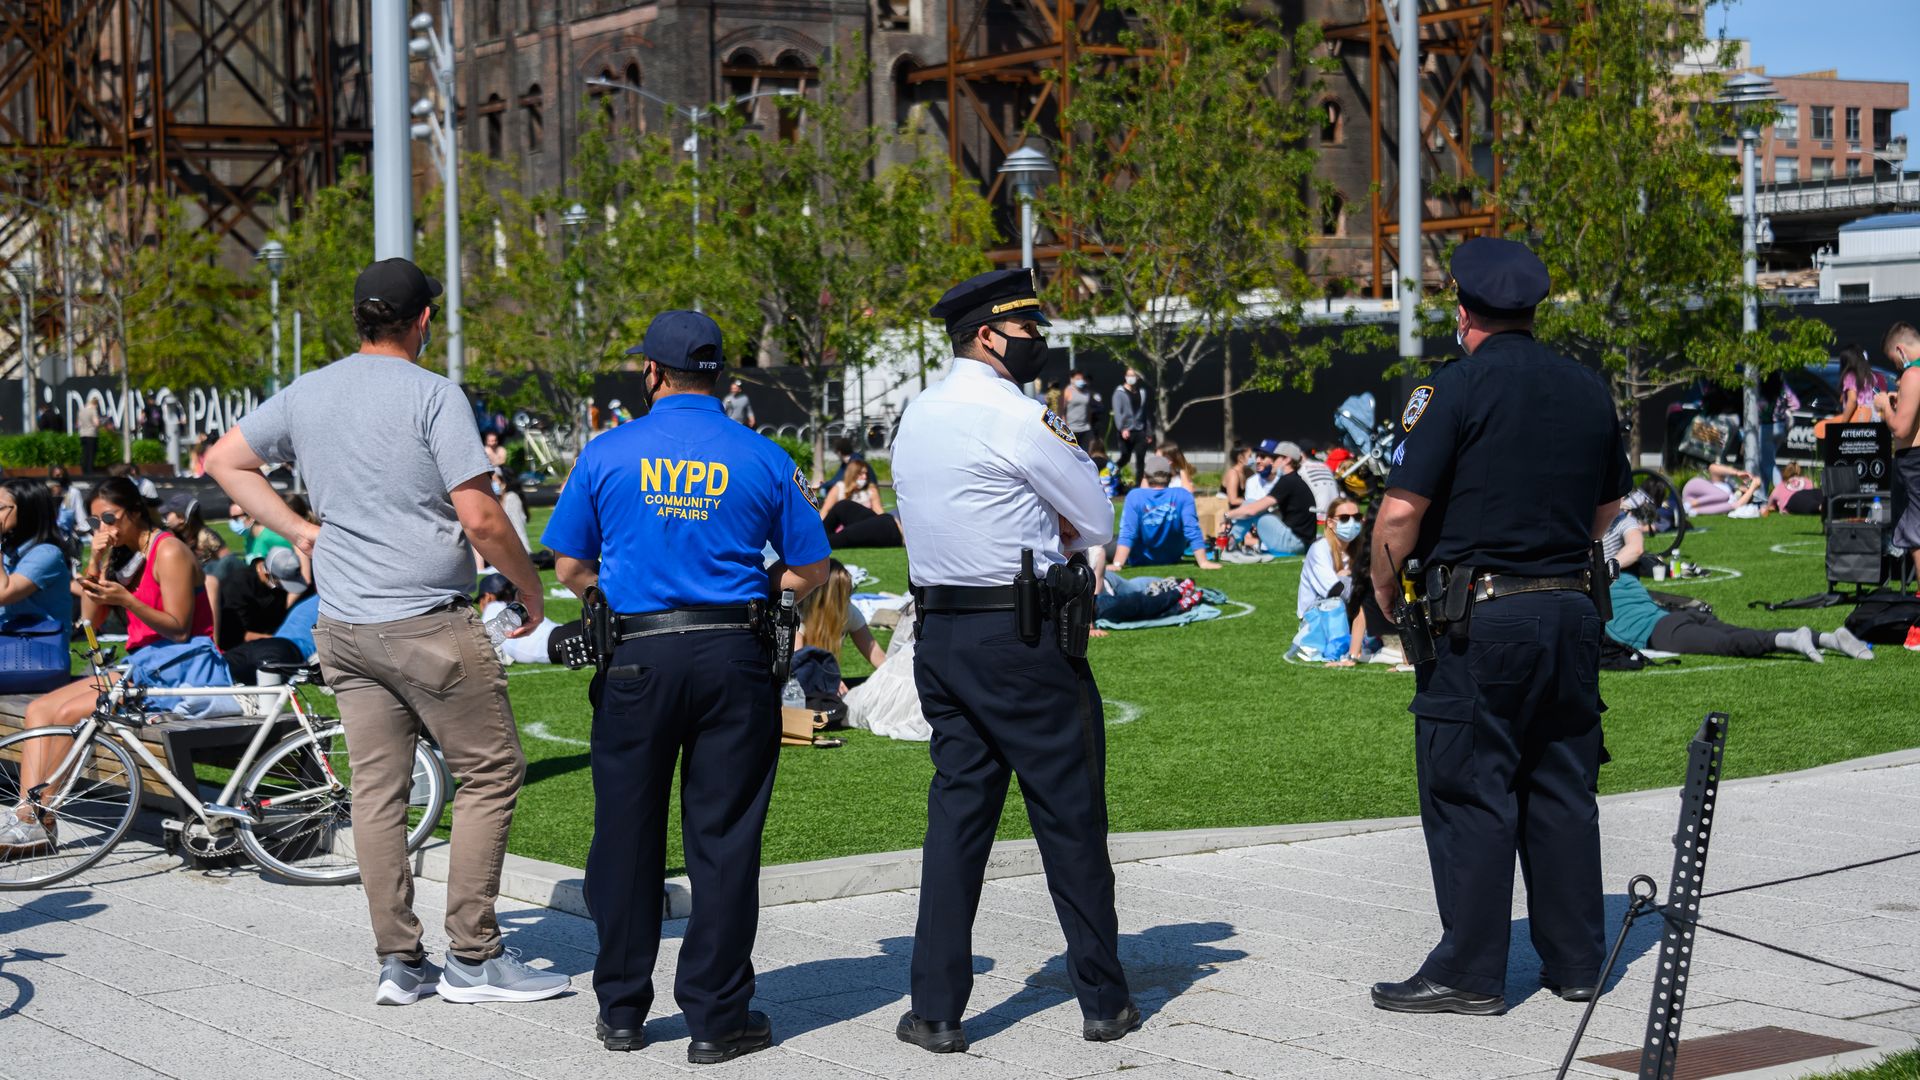 In this image, a line of NYPD police officers stand outside in a park